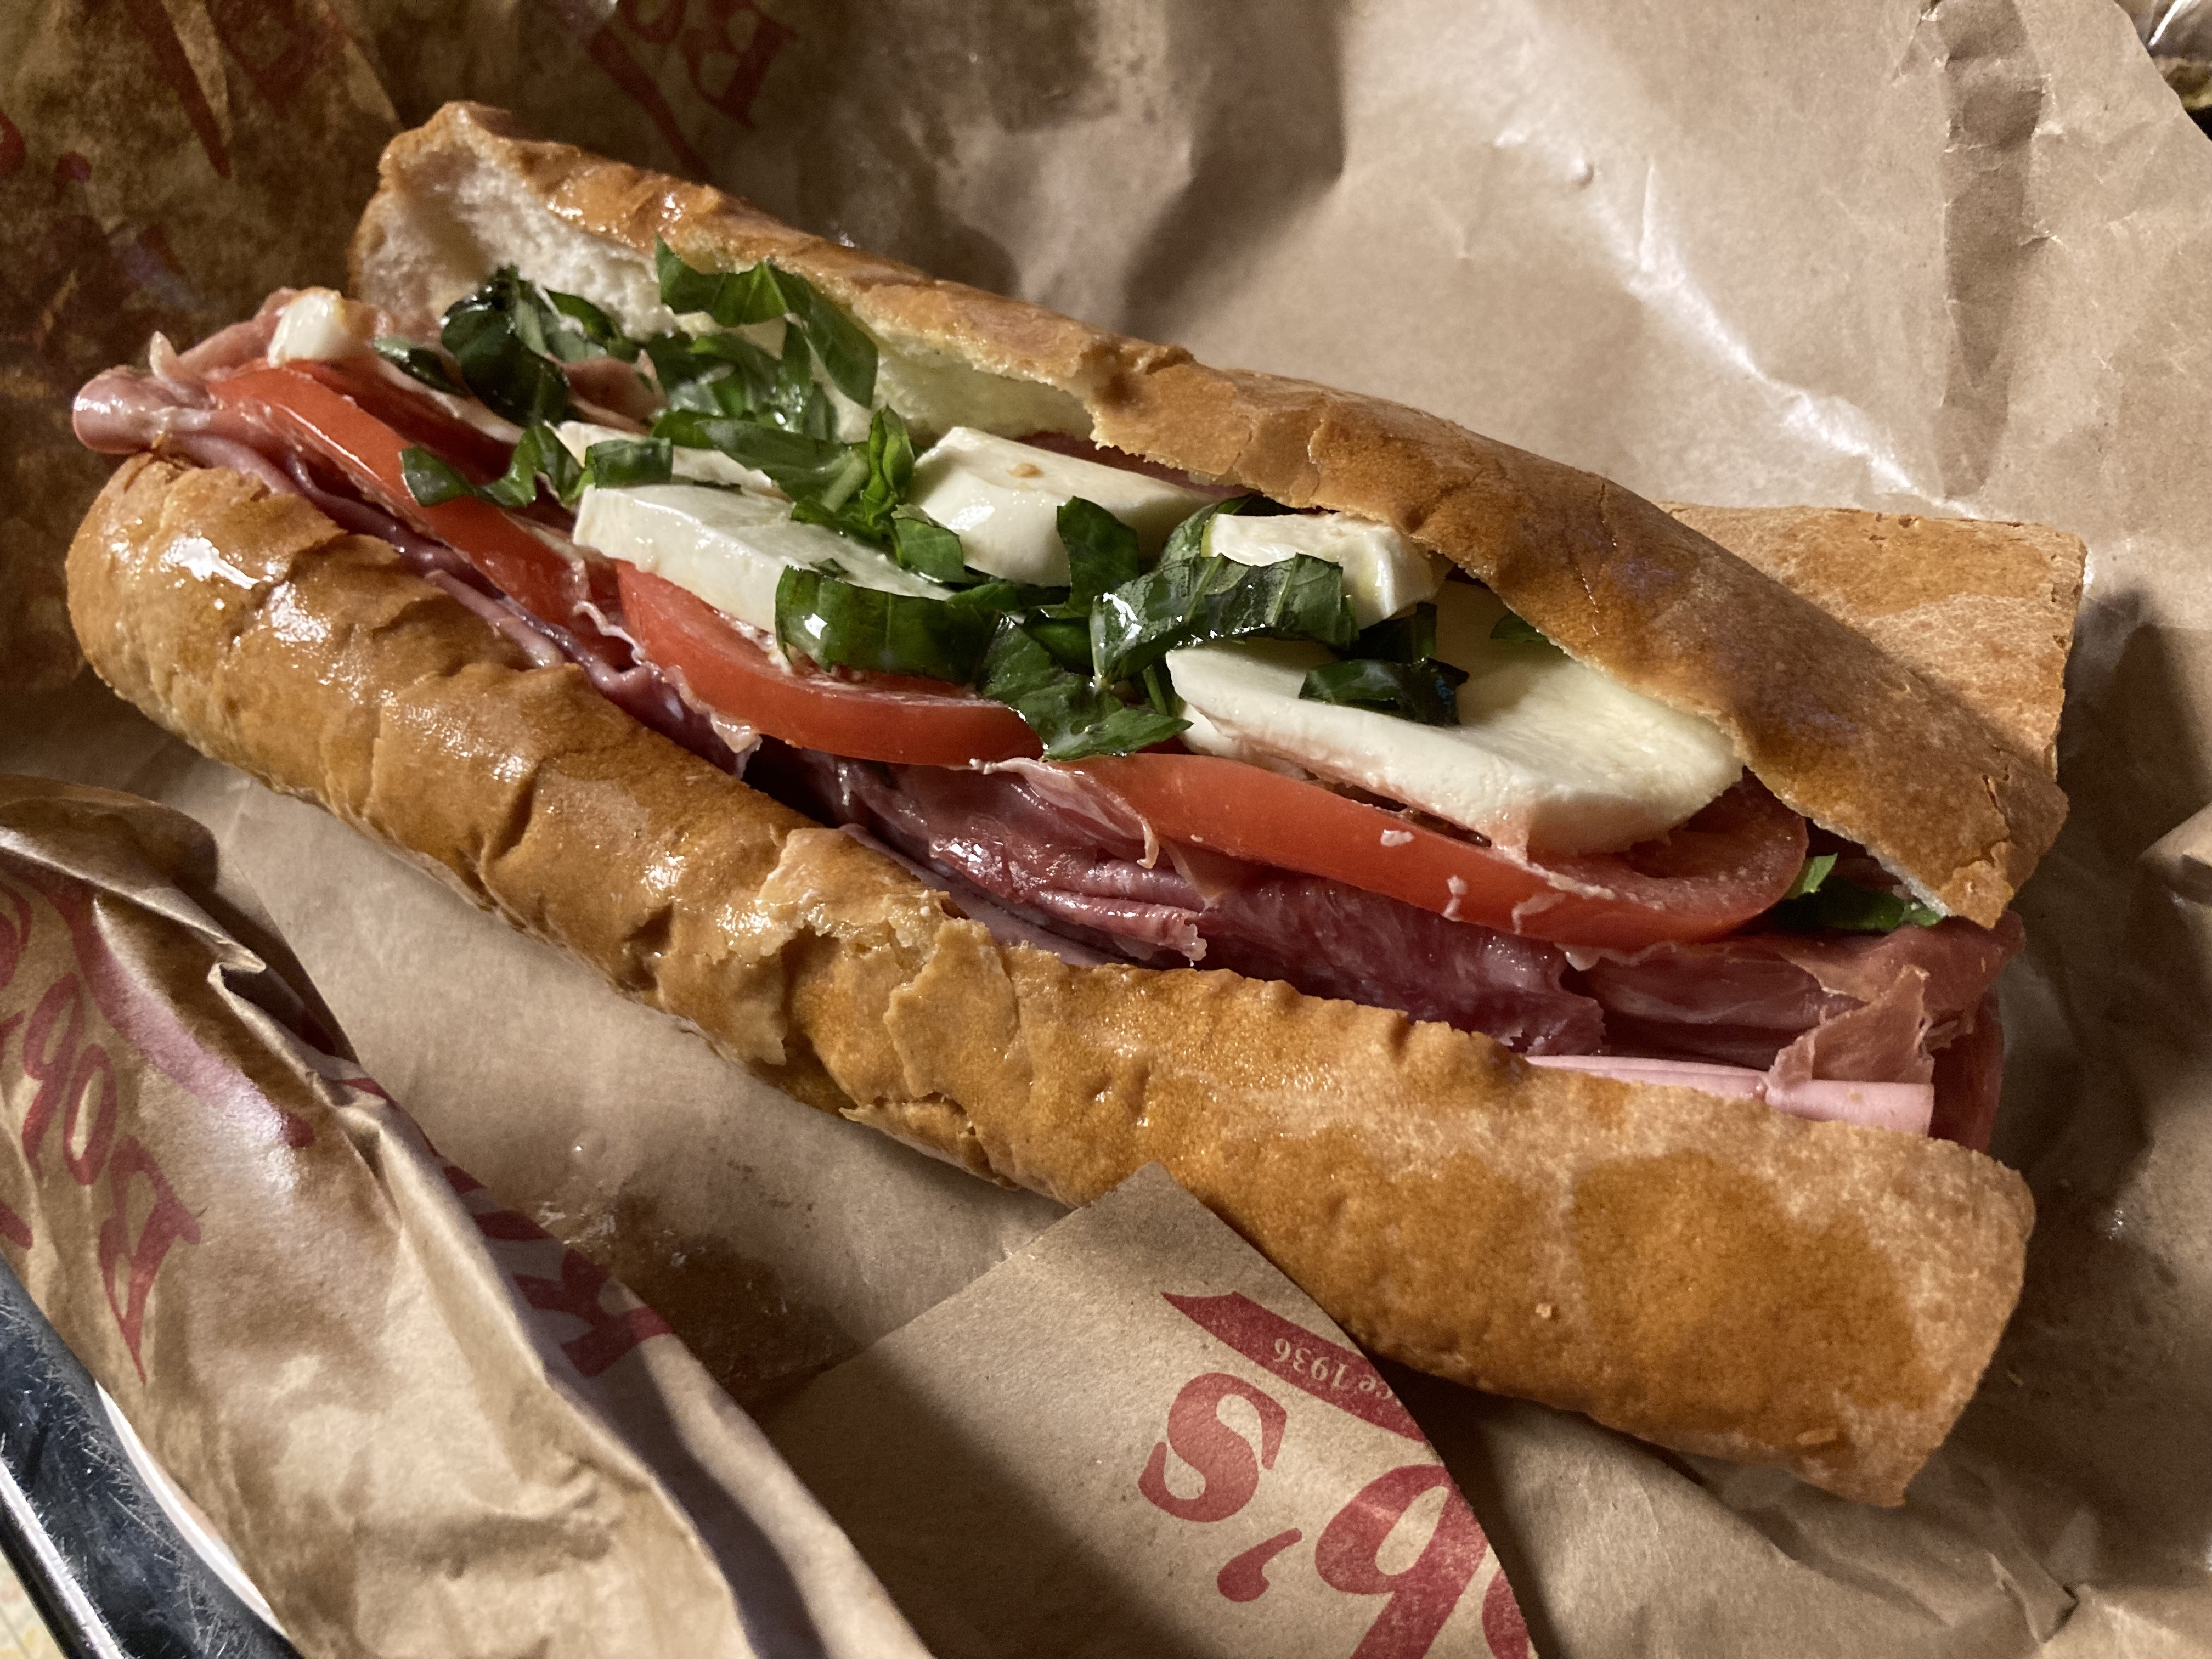 PHOTOS: Subs and more at Bob's Italian Foods